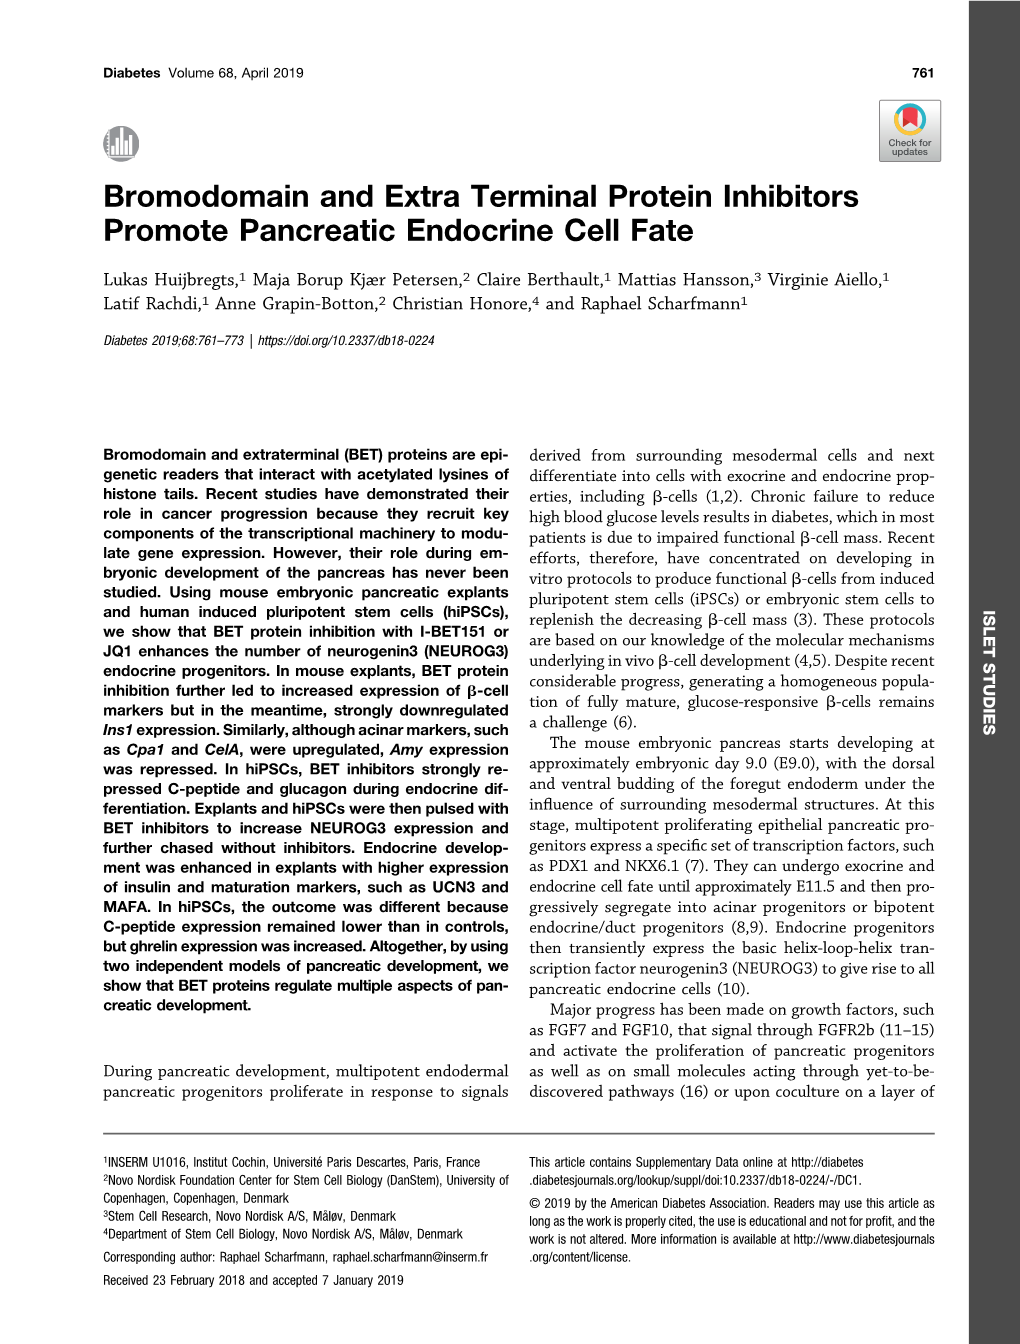 Bromodomain and Extra Terminal Protein Inhibitors Promote Pancreatic Endocrine Cell Fate